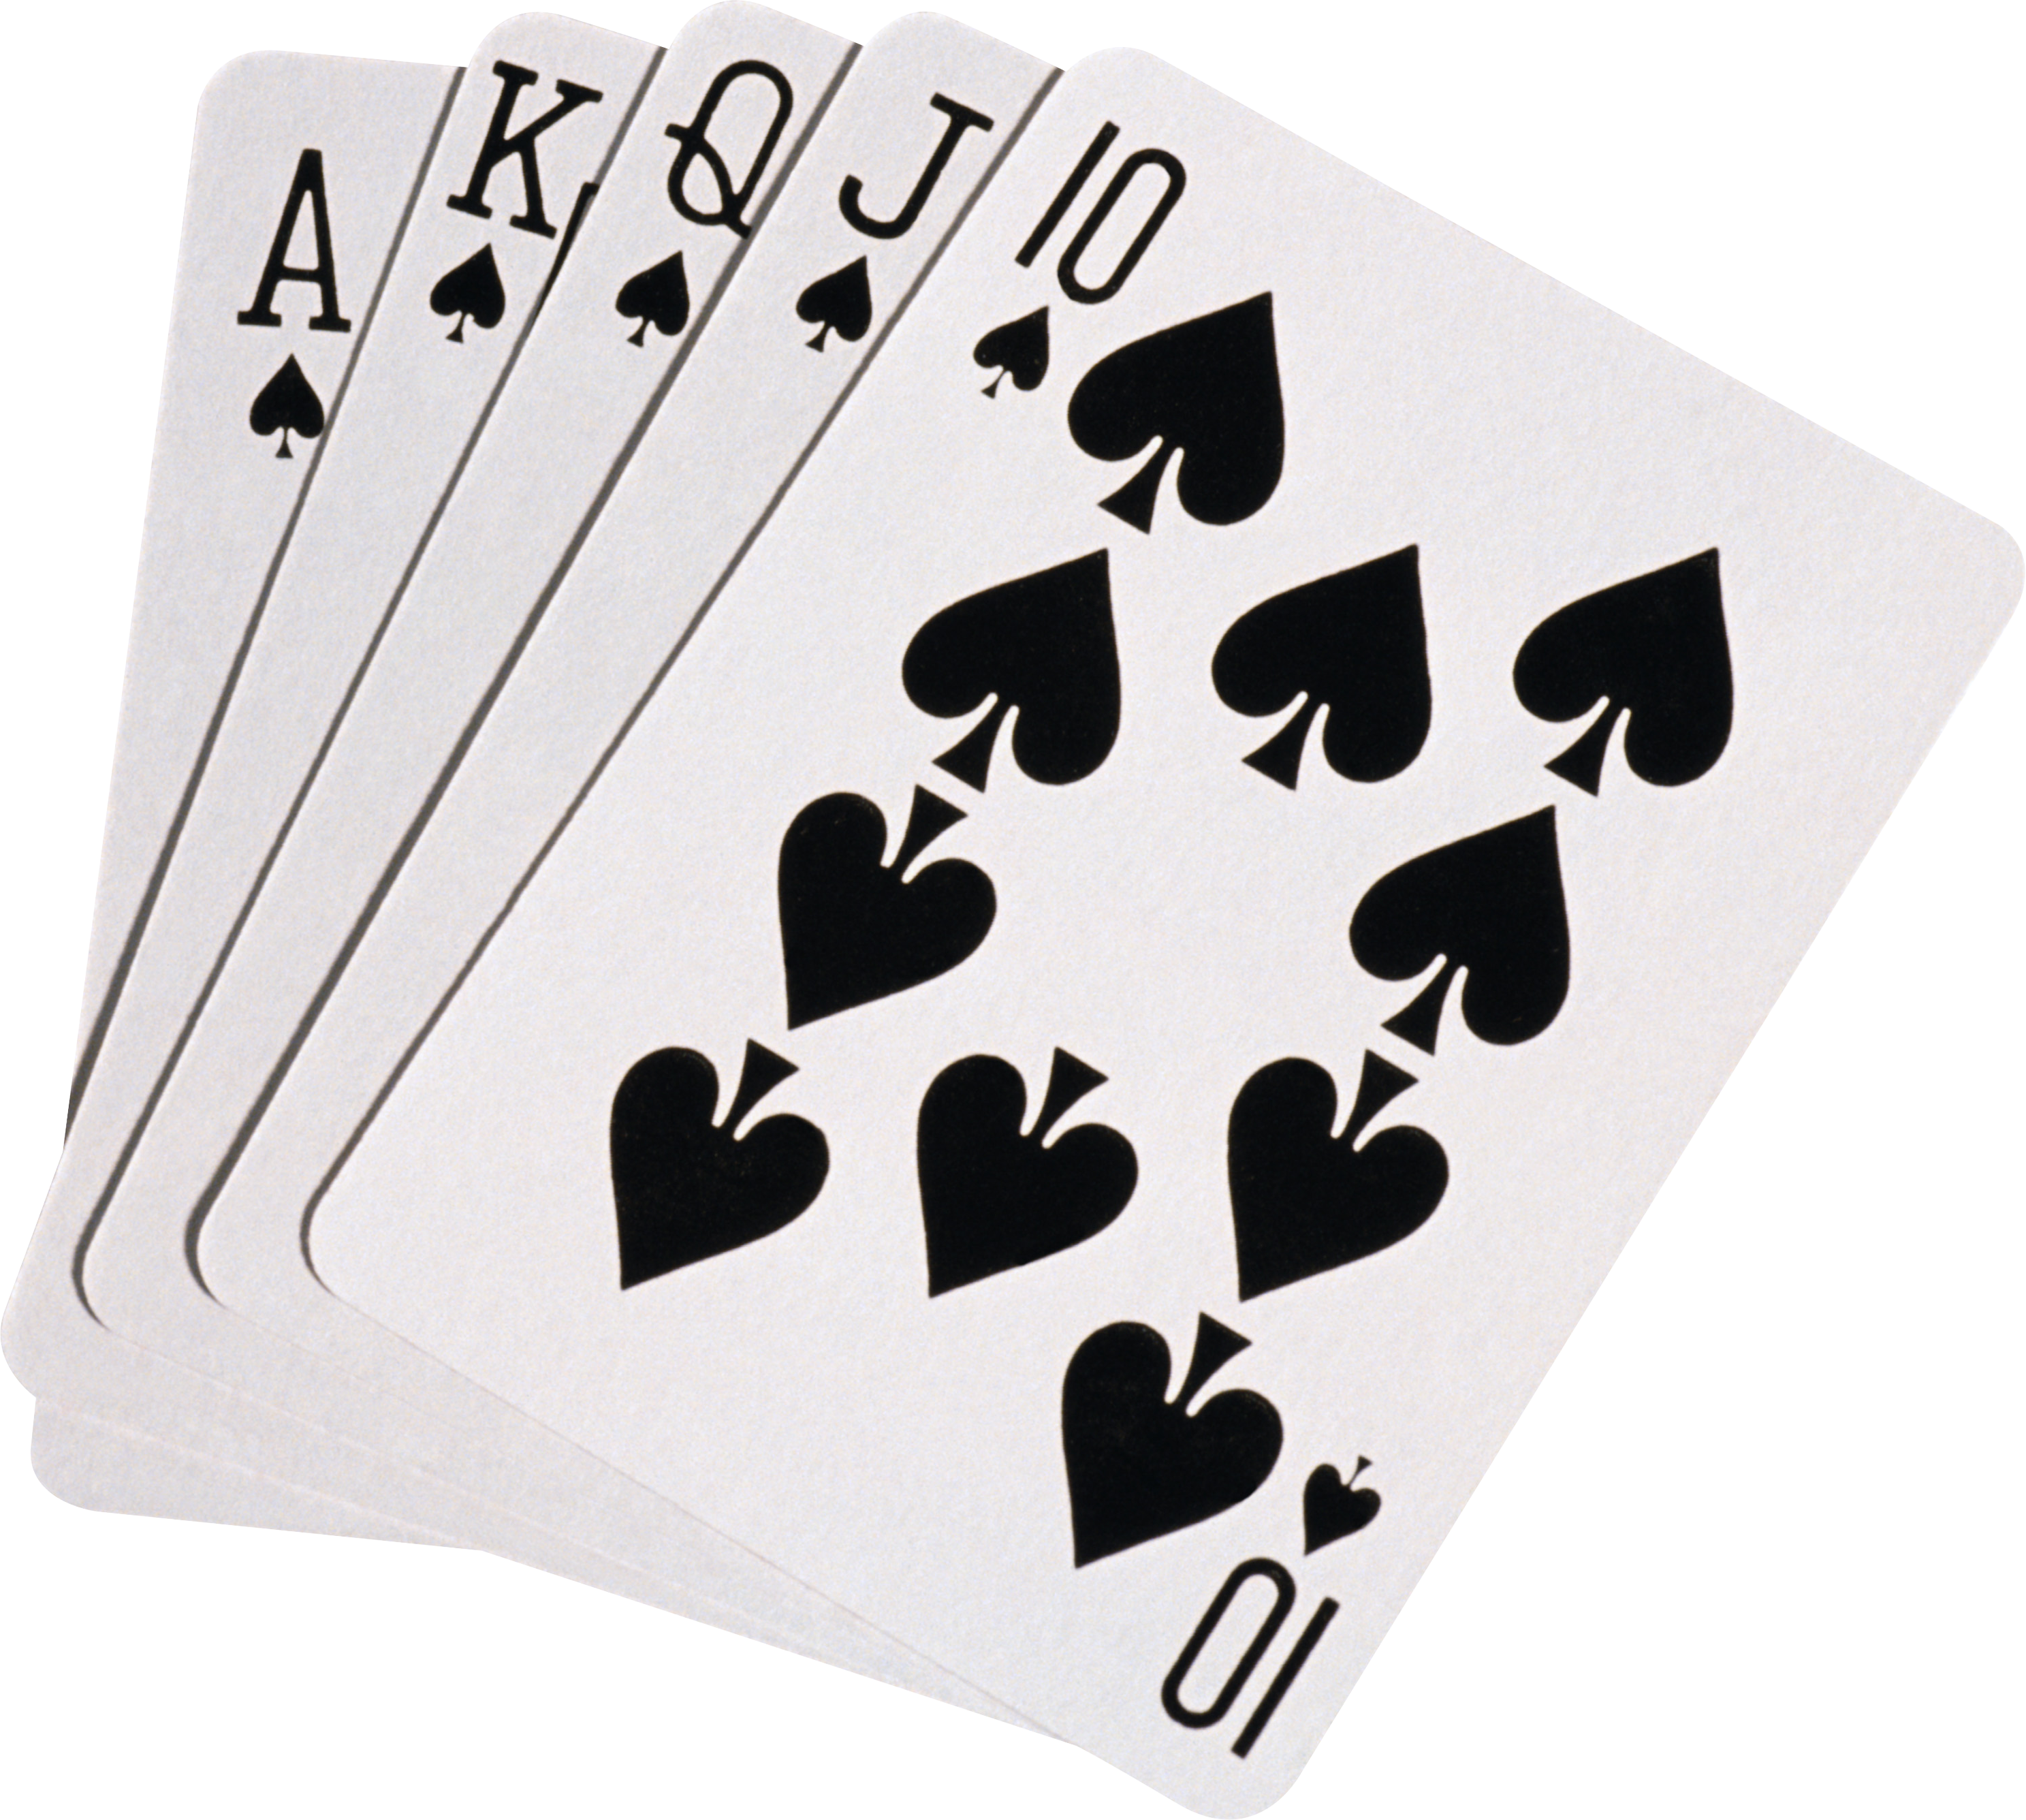 free clipart images playing cards - photo #31